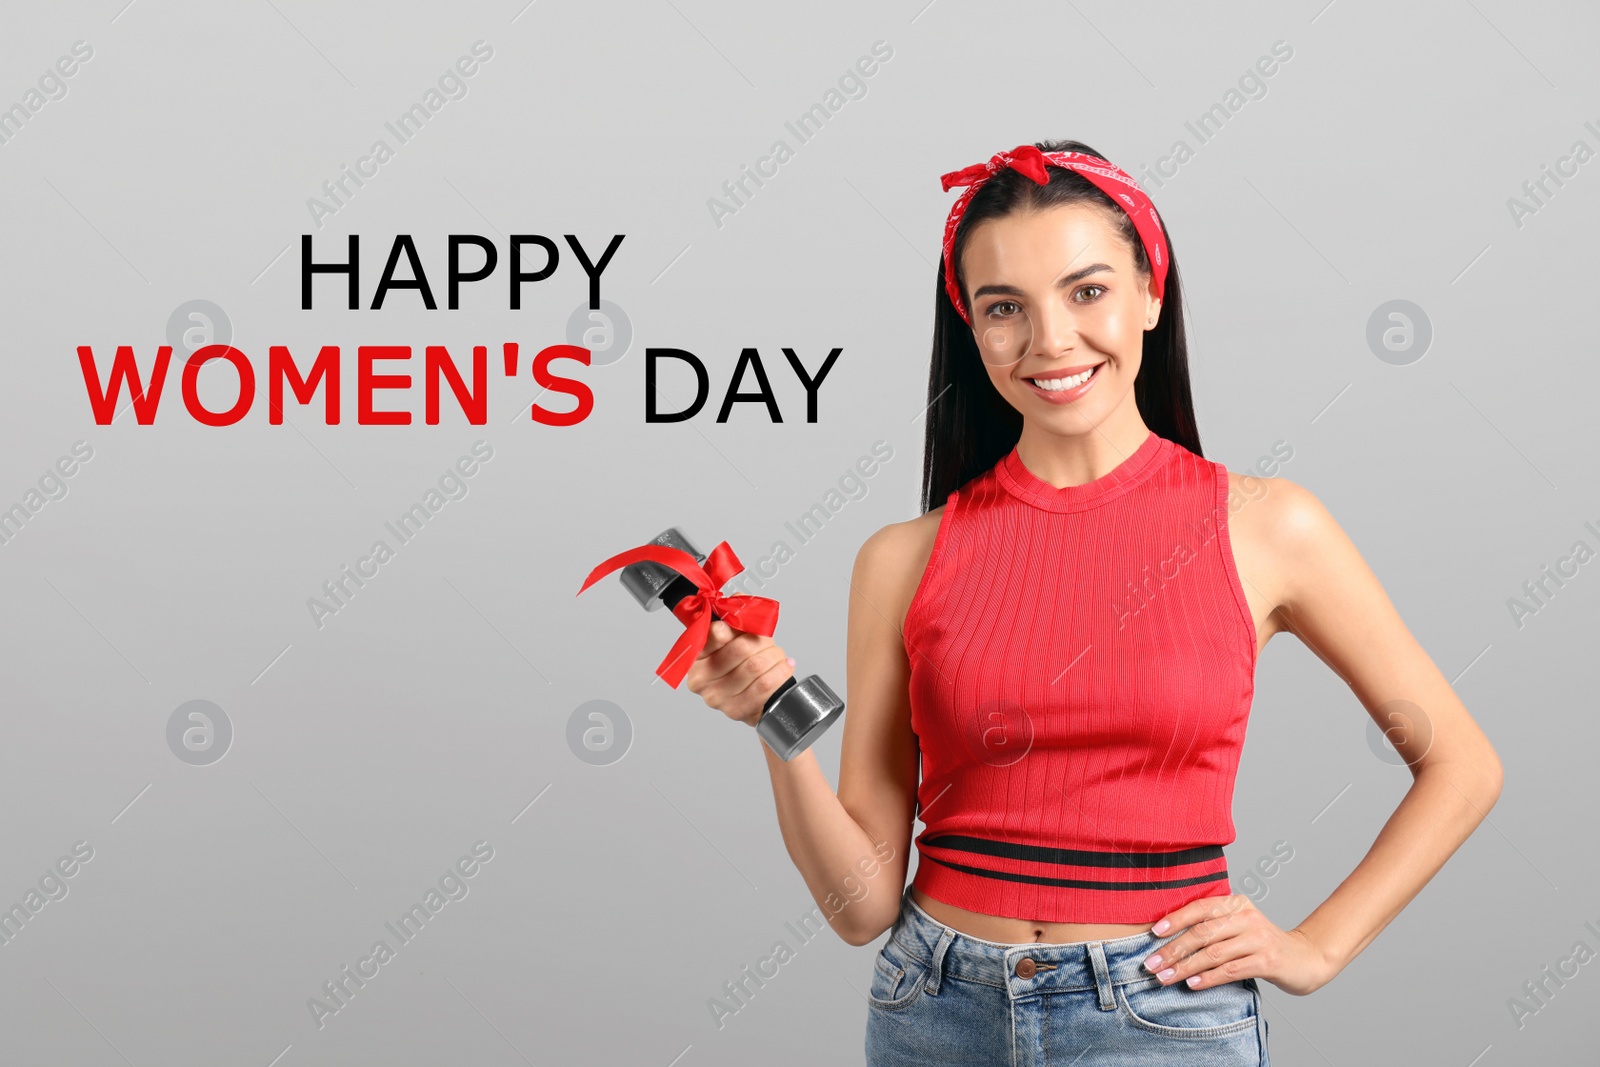 Image of Woman with dumbbell as symbol of girl power on light grey background. Happy Women's Day